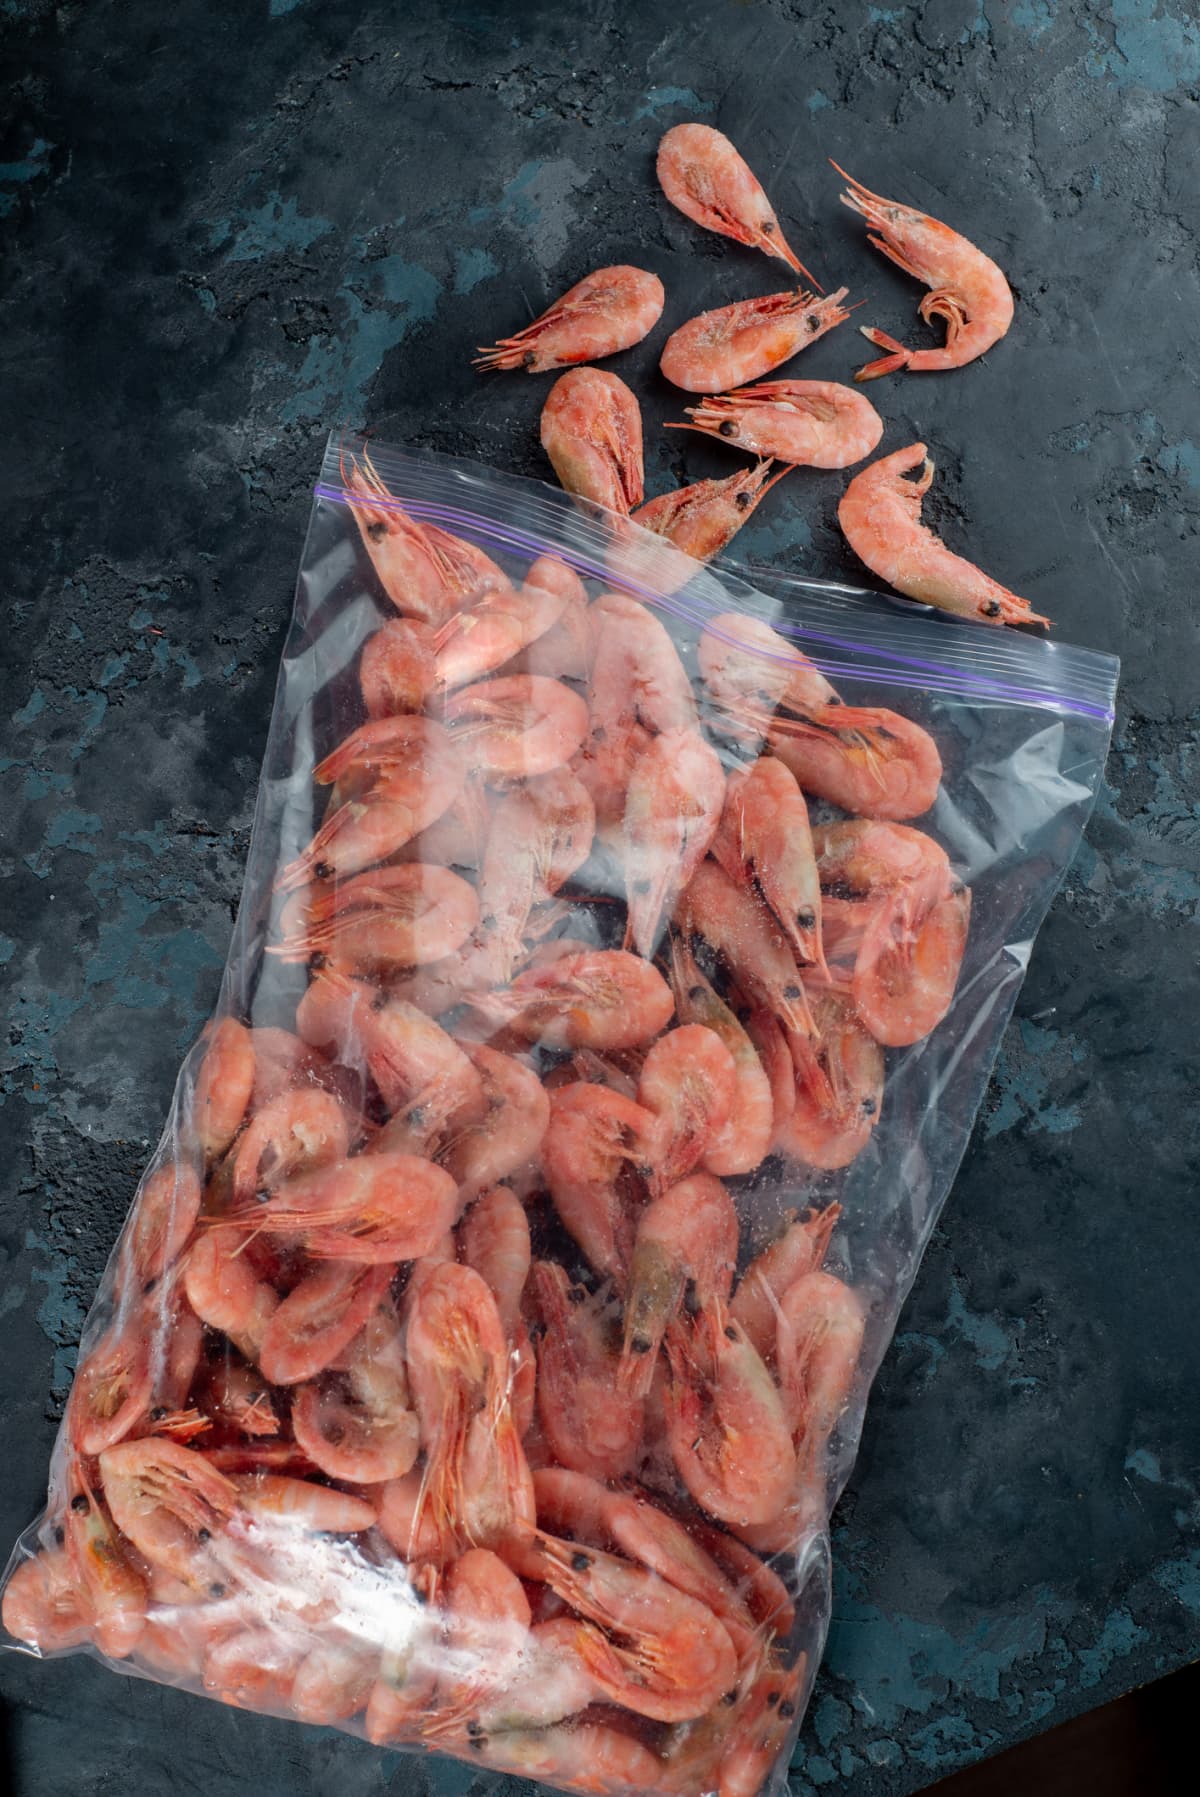 Shrimp falling out of plastic packaging